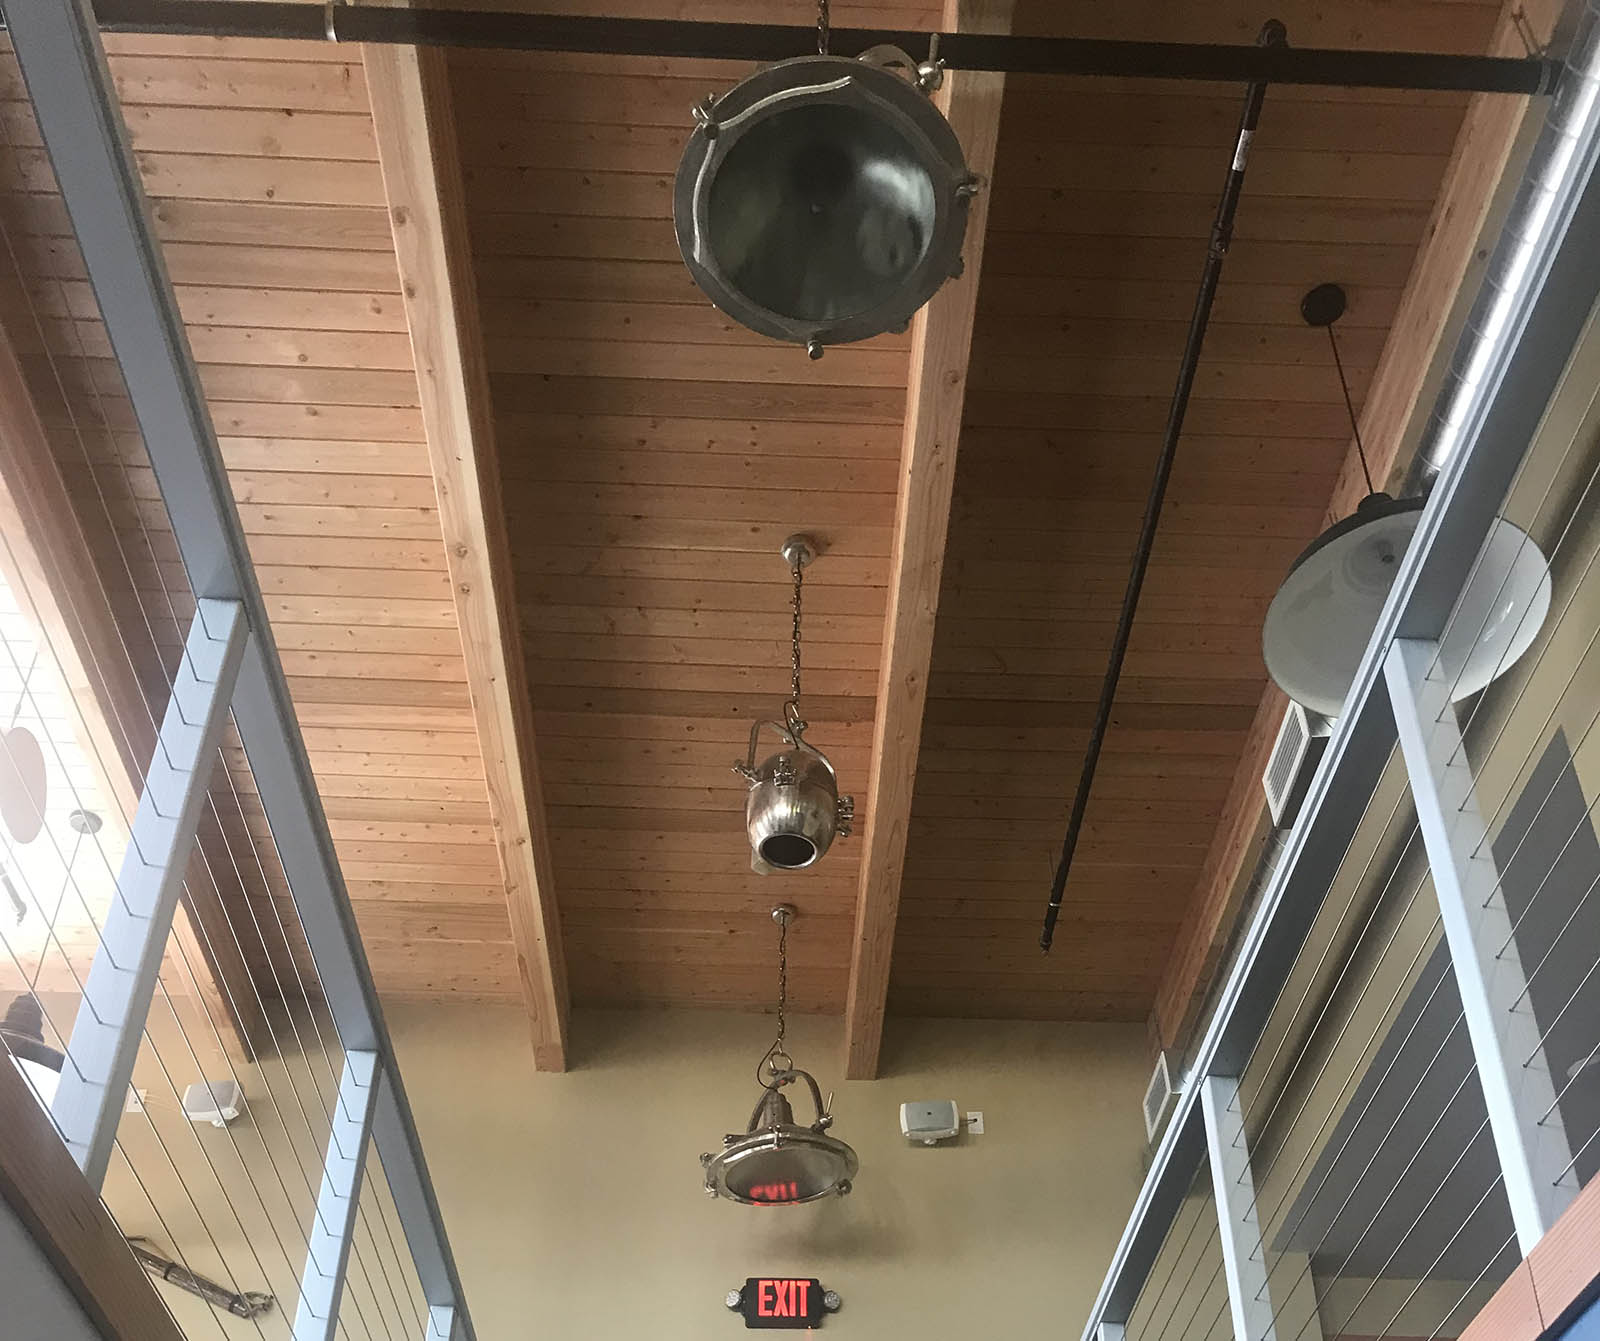 Overhead pendant style lights at Shipwrecked Brew Pub